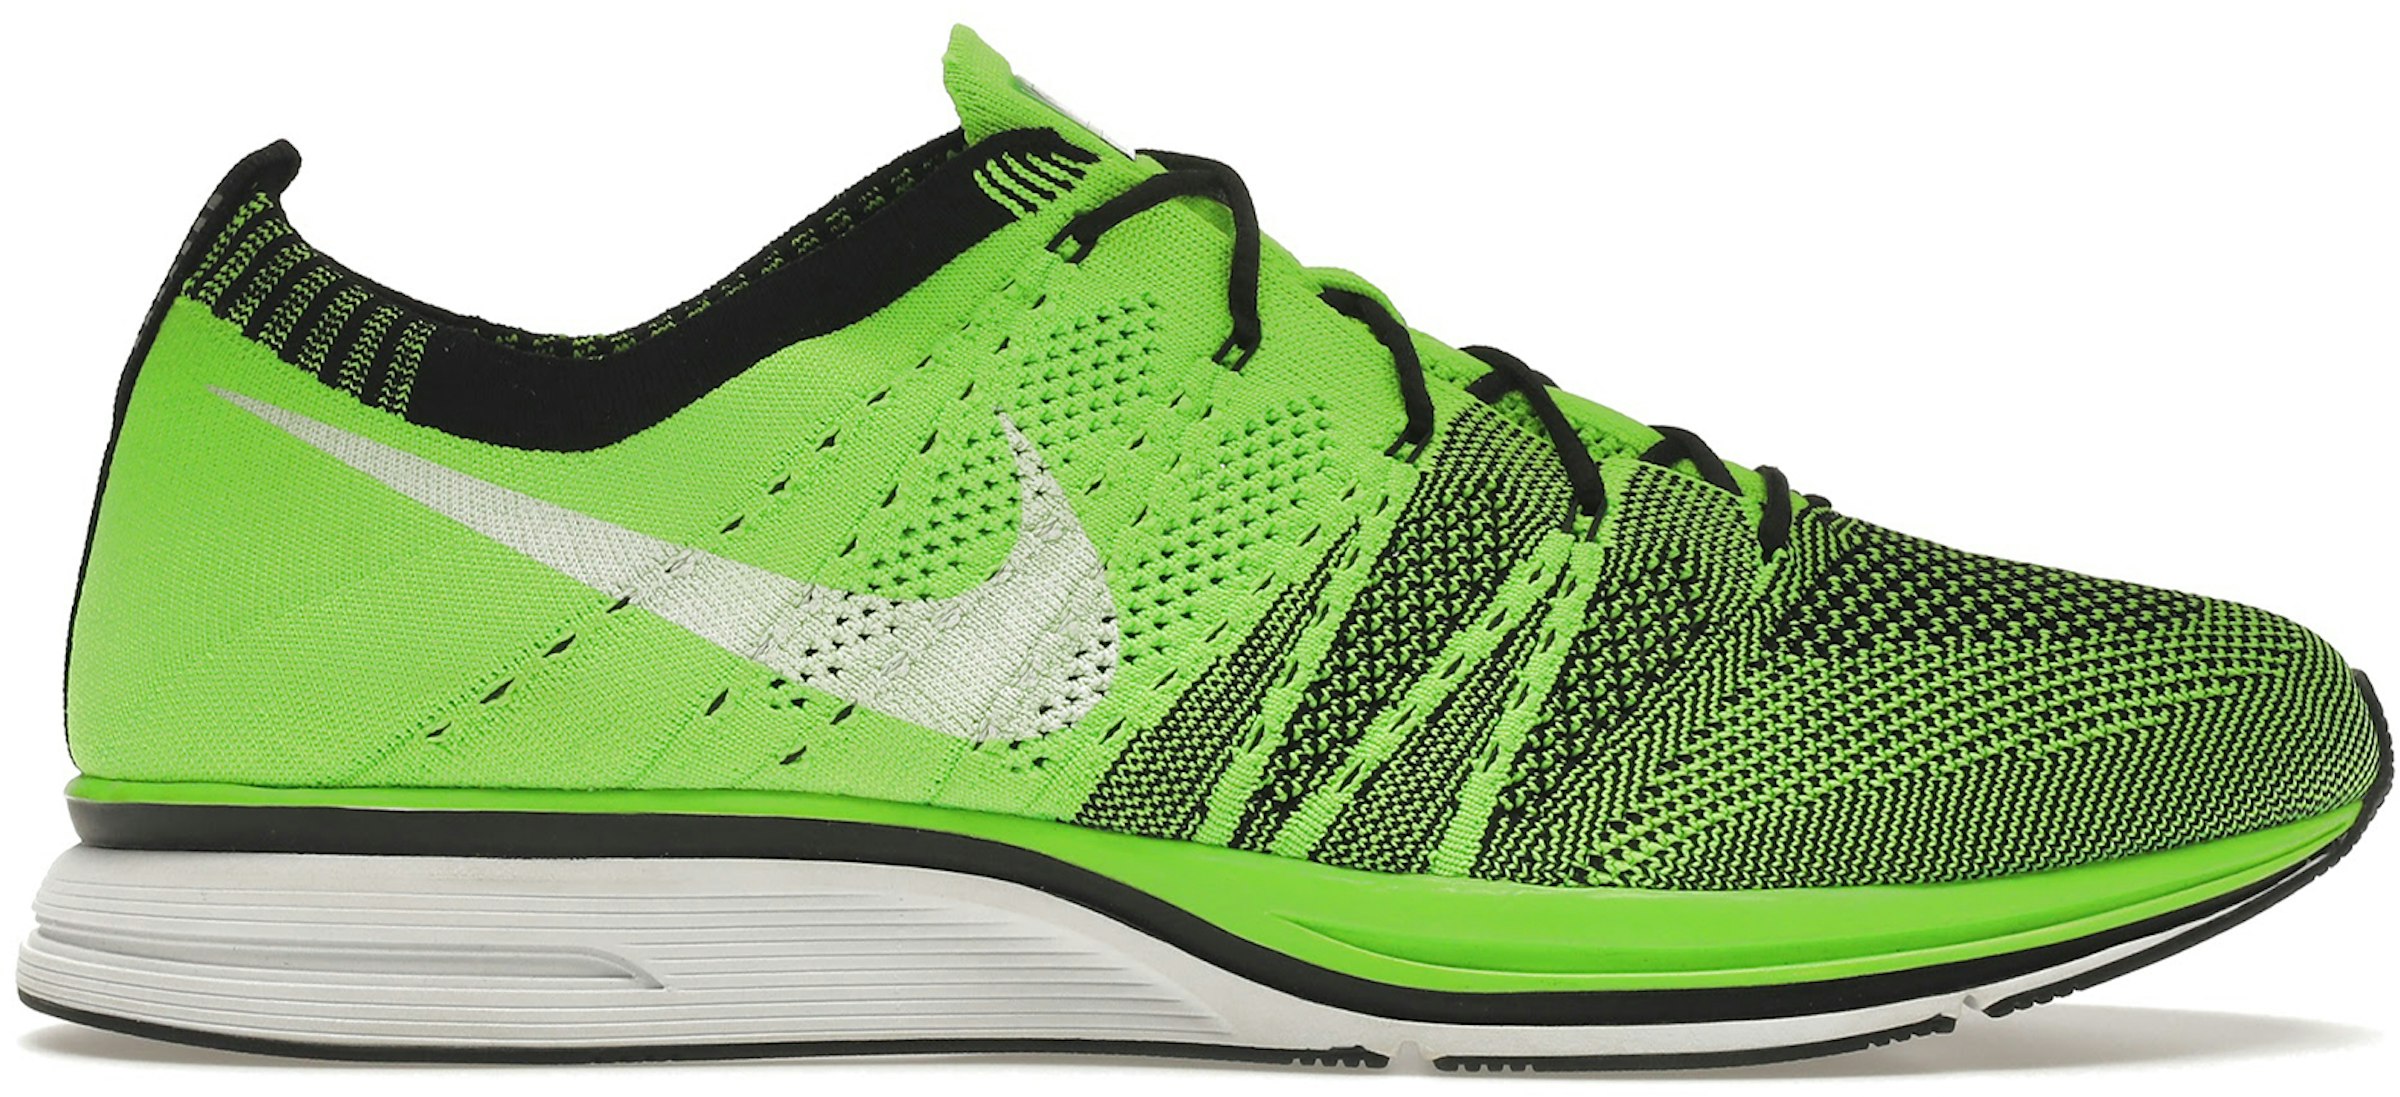 Simular Adiós cilindro Nike Flyknit Trainer Electric Green Men's - 532984-301 - US